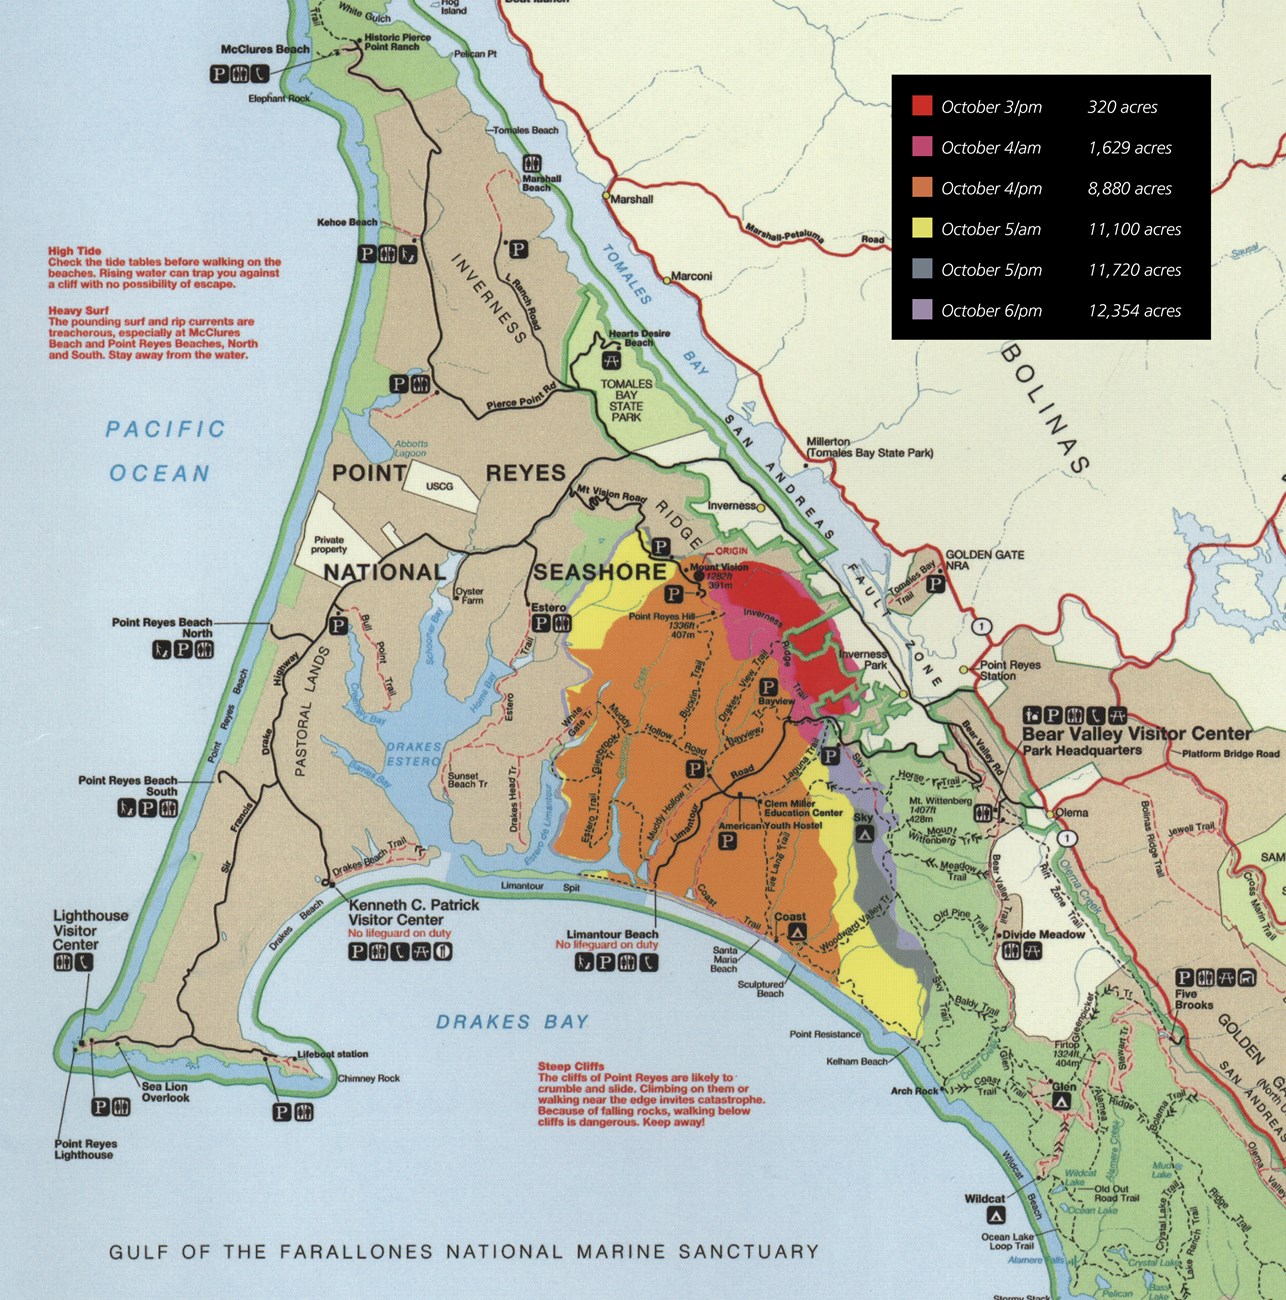 A map of Point Reyes National Seashore showing the areas that were burned by the 1995 Vision Fire on October 3, October 4, October 5, and October 6.